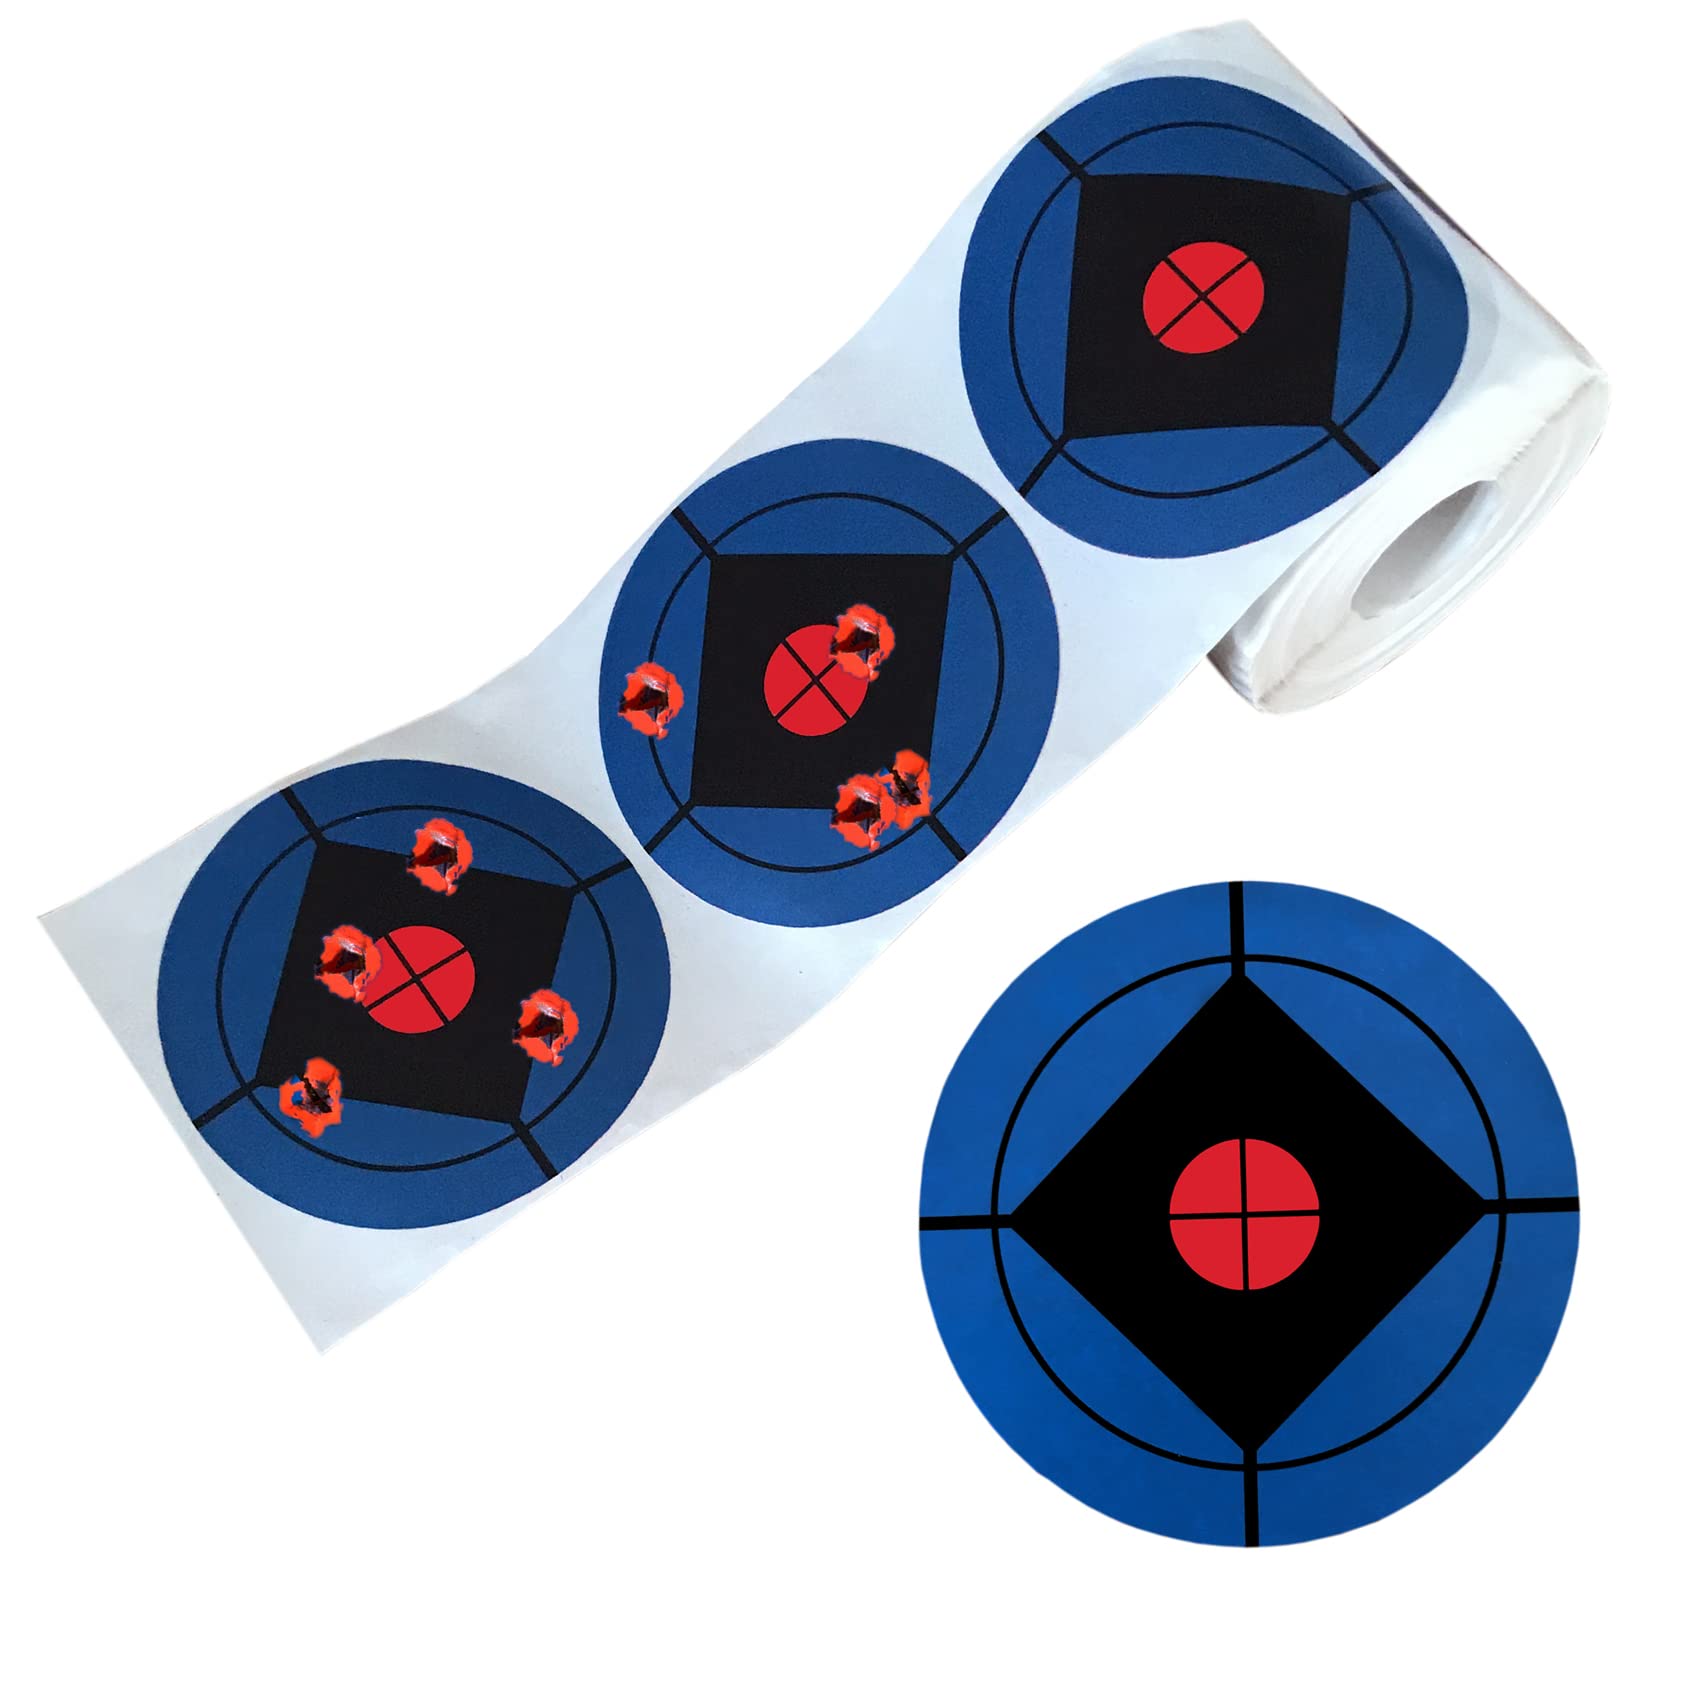 Splatter Targets | 3 inch Target Stickers | 250 Targets - Instantly See  Your Shots Burst Bright Red Upon Impact!